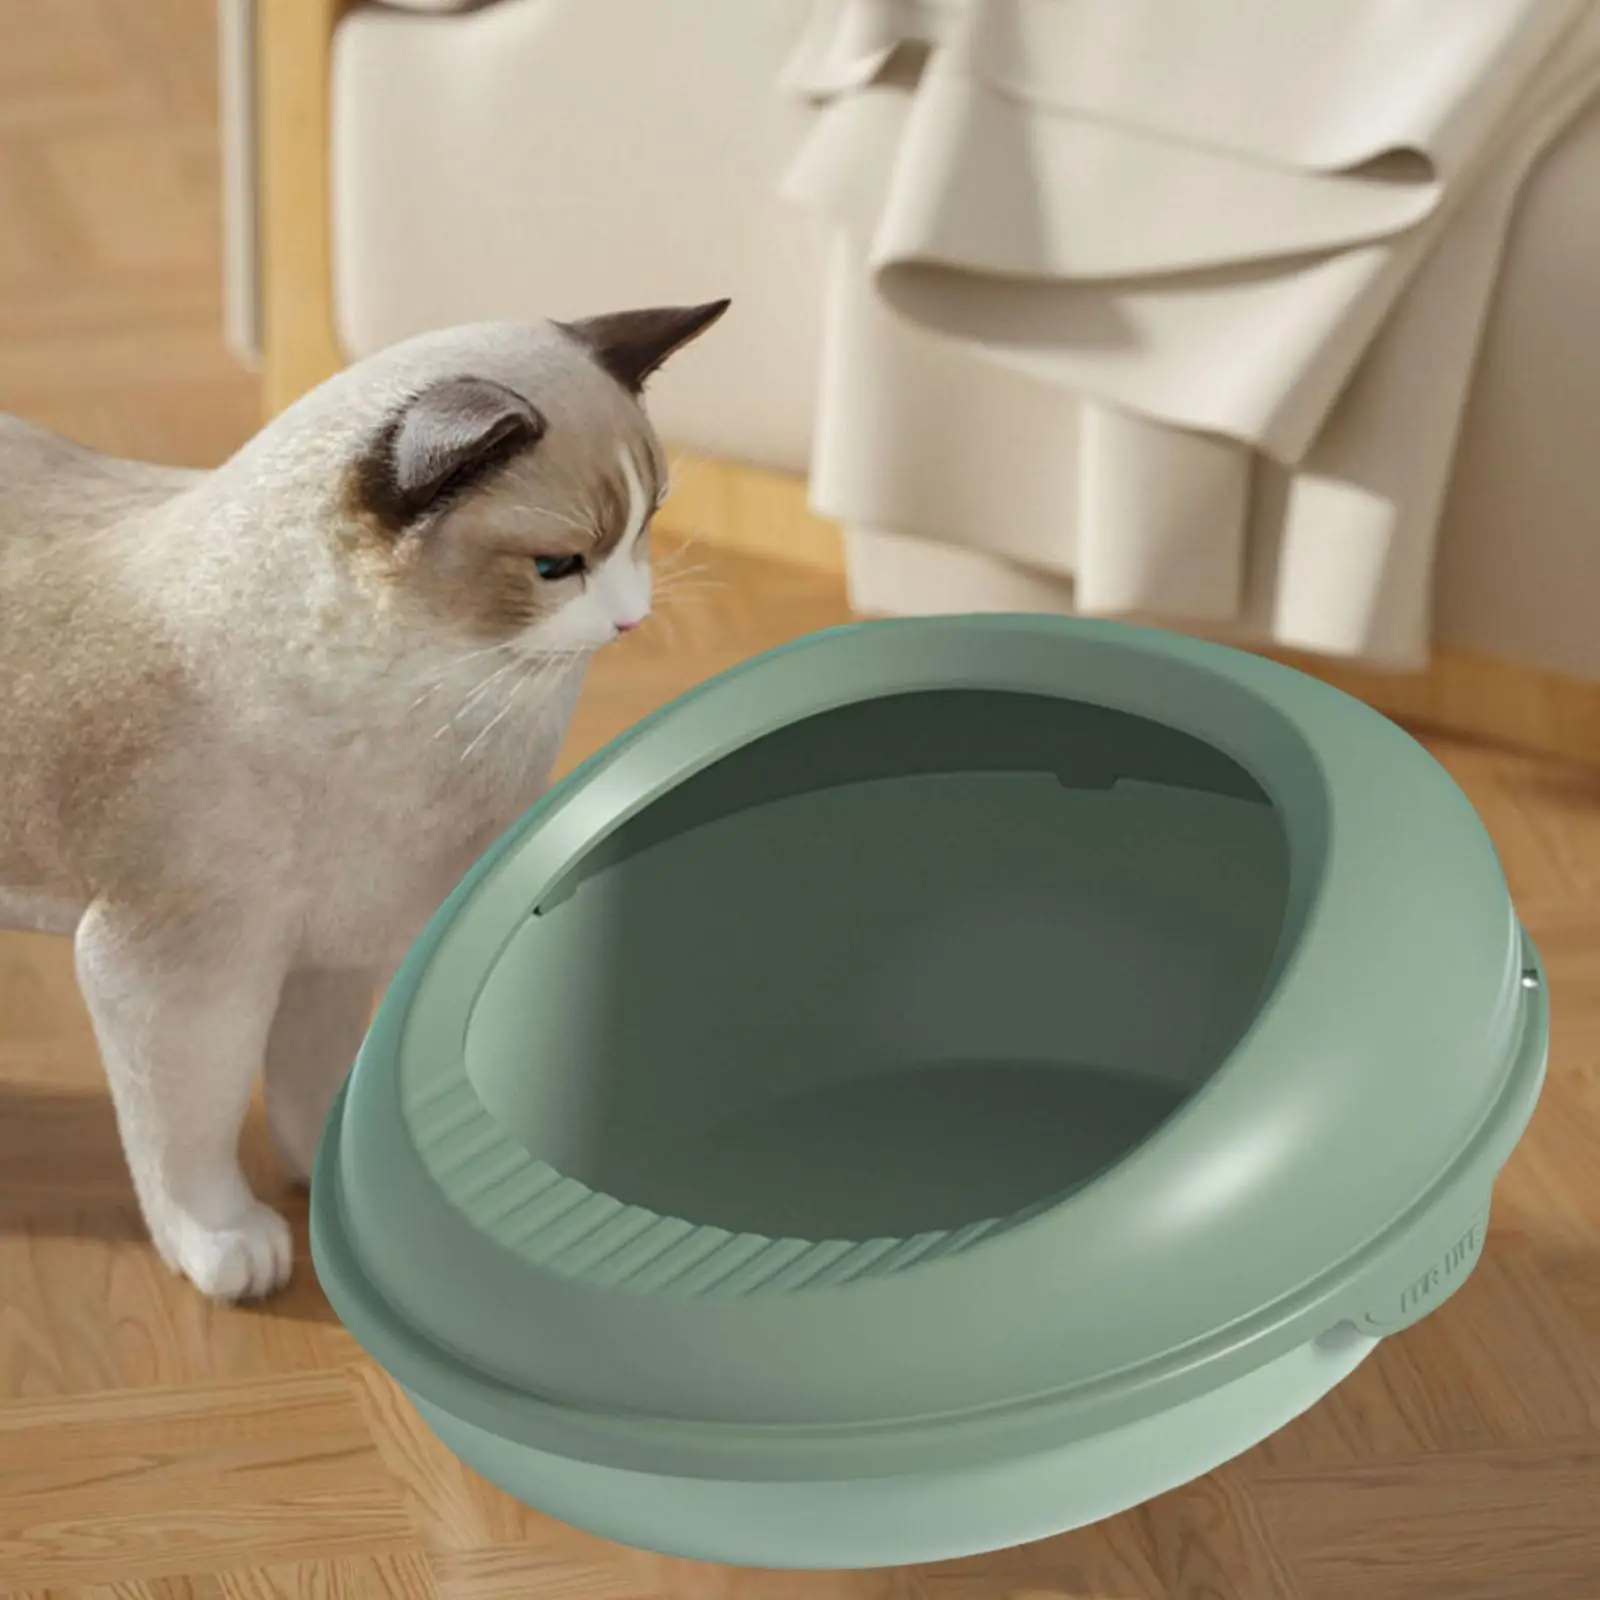 Pet Cat Litter Box High Sided Rim Detachable Design Tray for Small Animals